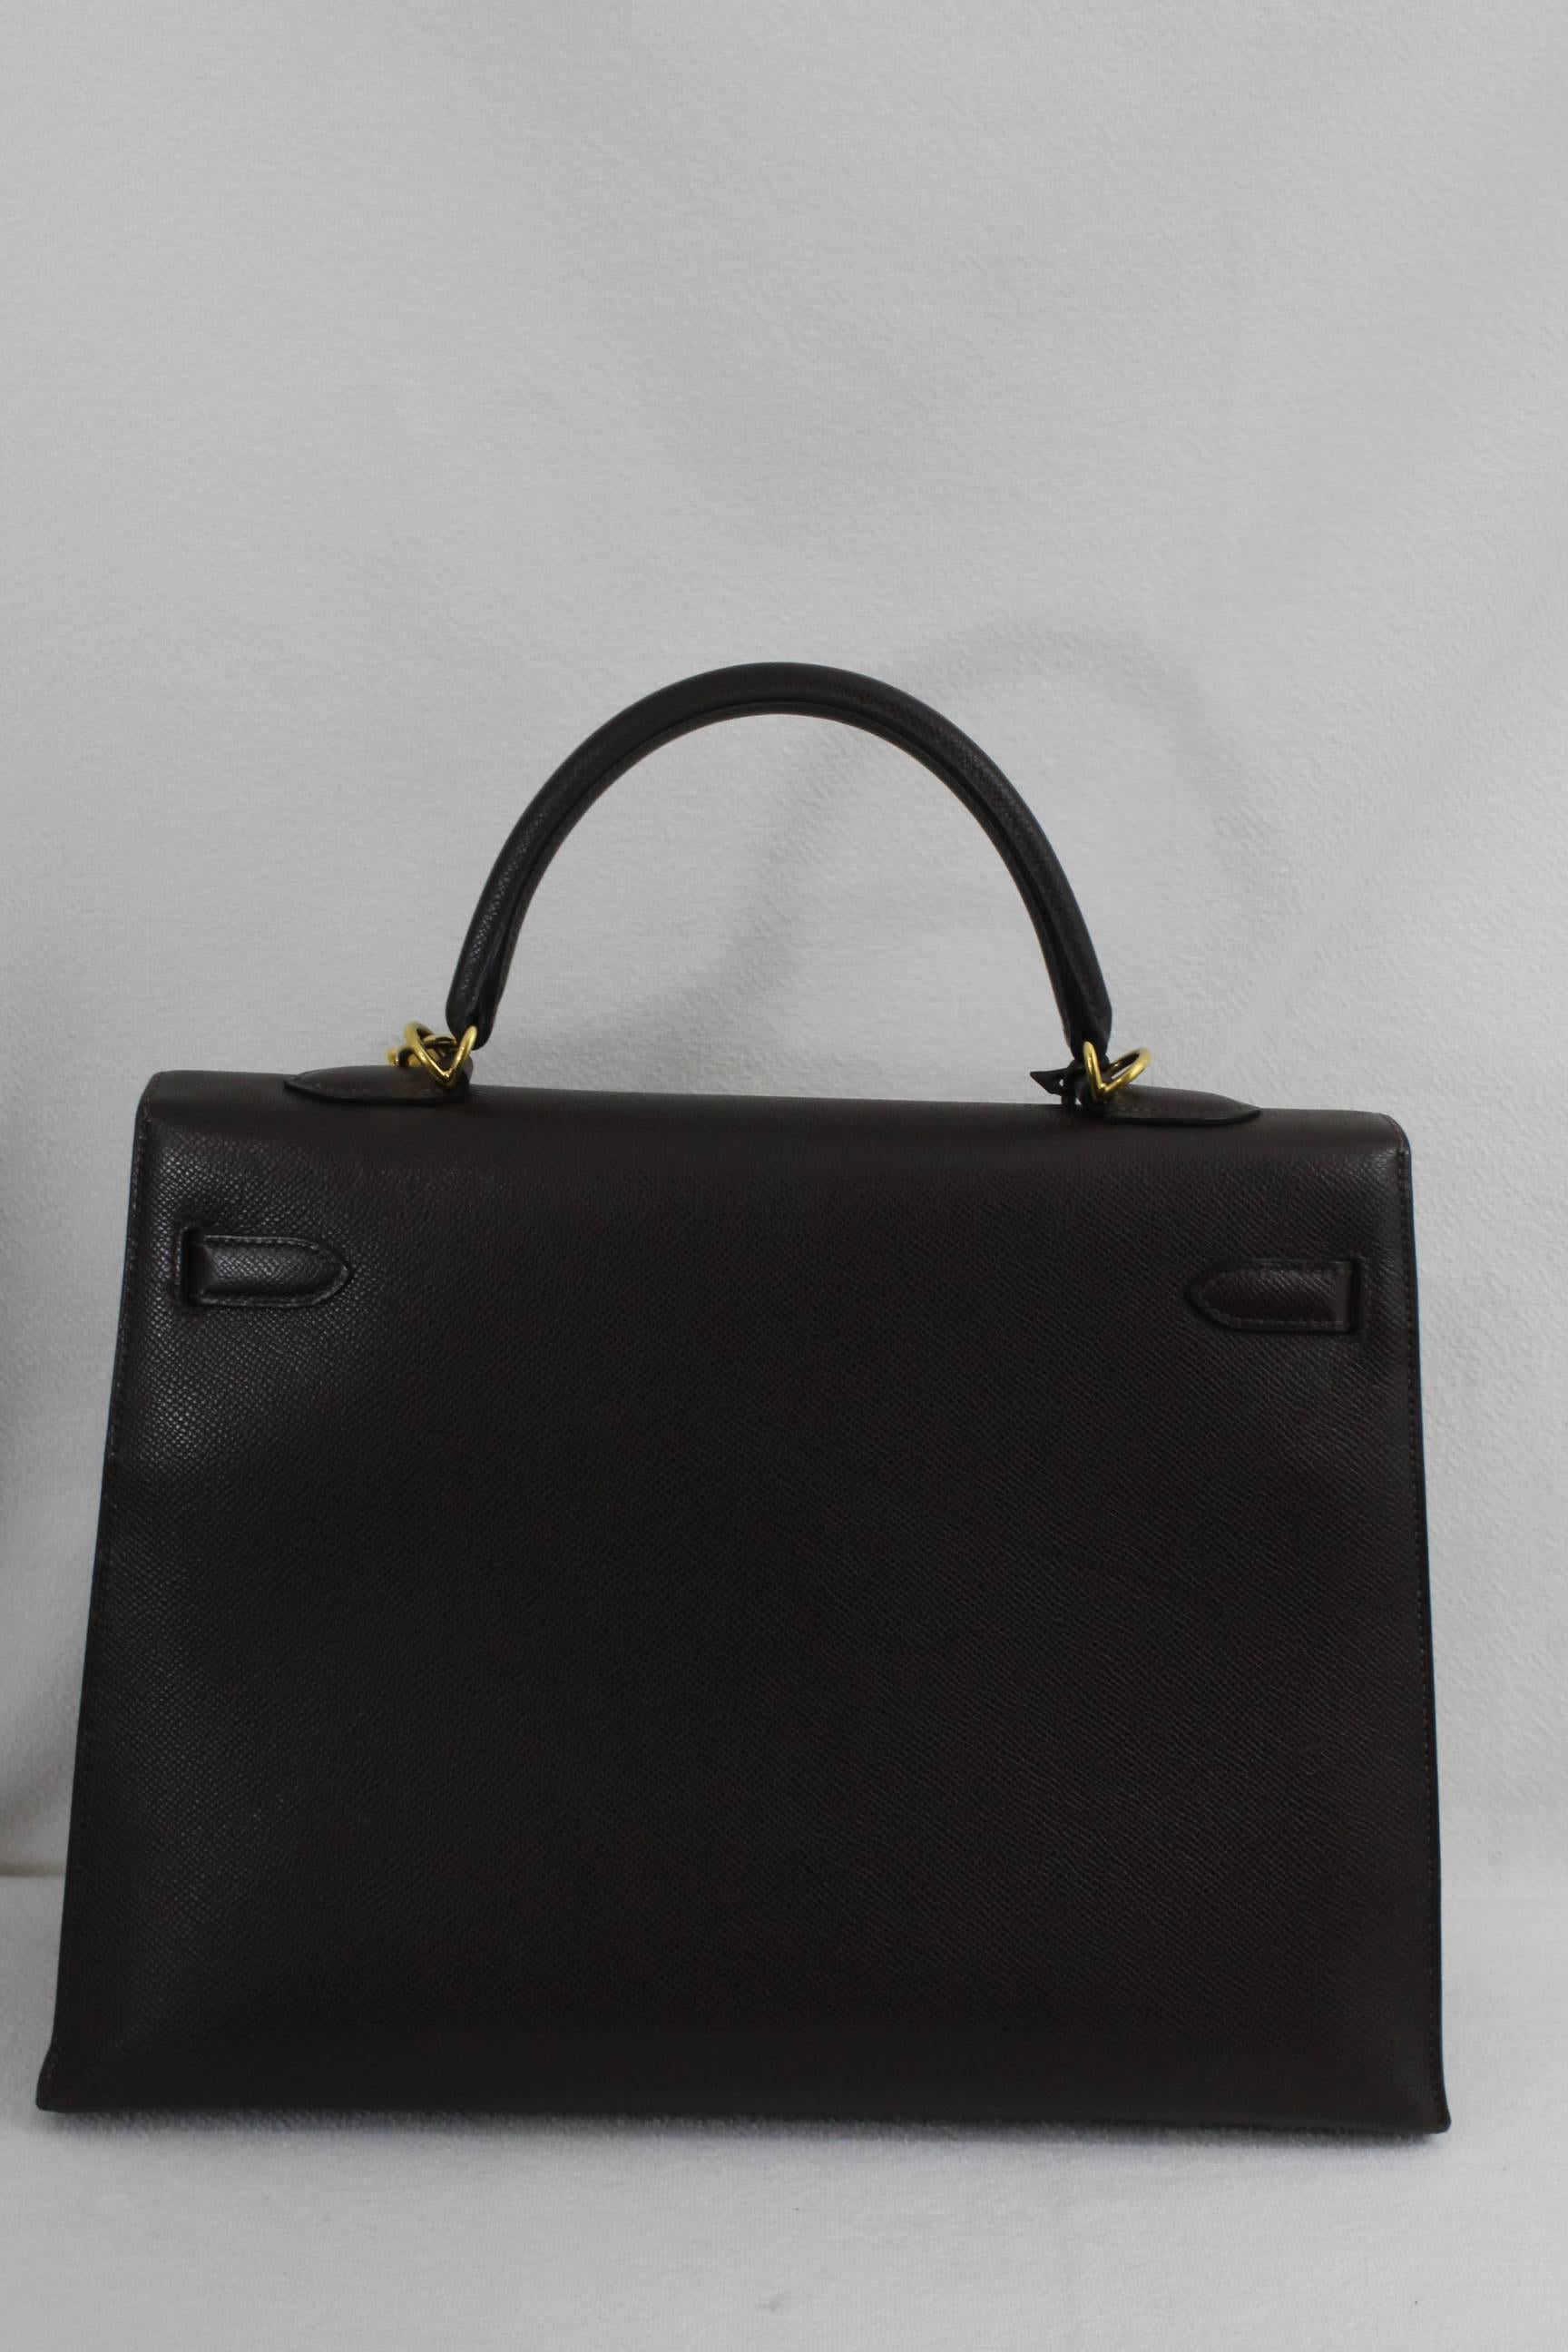 Gray 2008 Hermes Dark Brown Epson Leather Kelly 36 Bag With Shoulder Strap For Sale